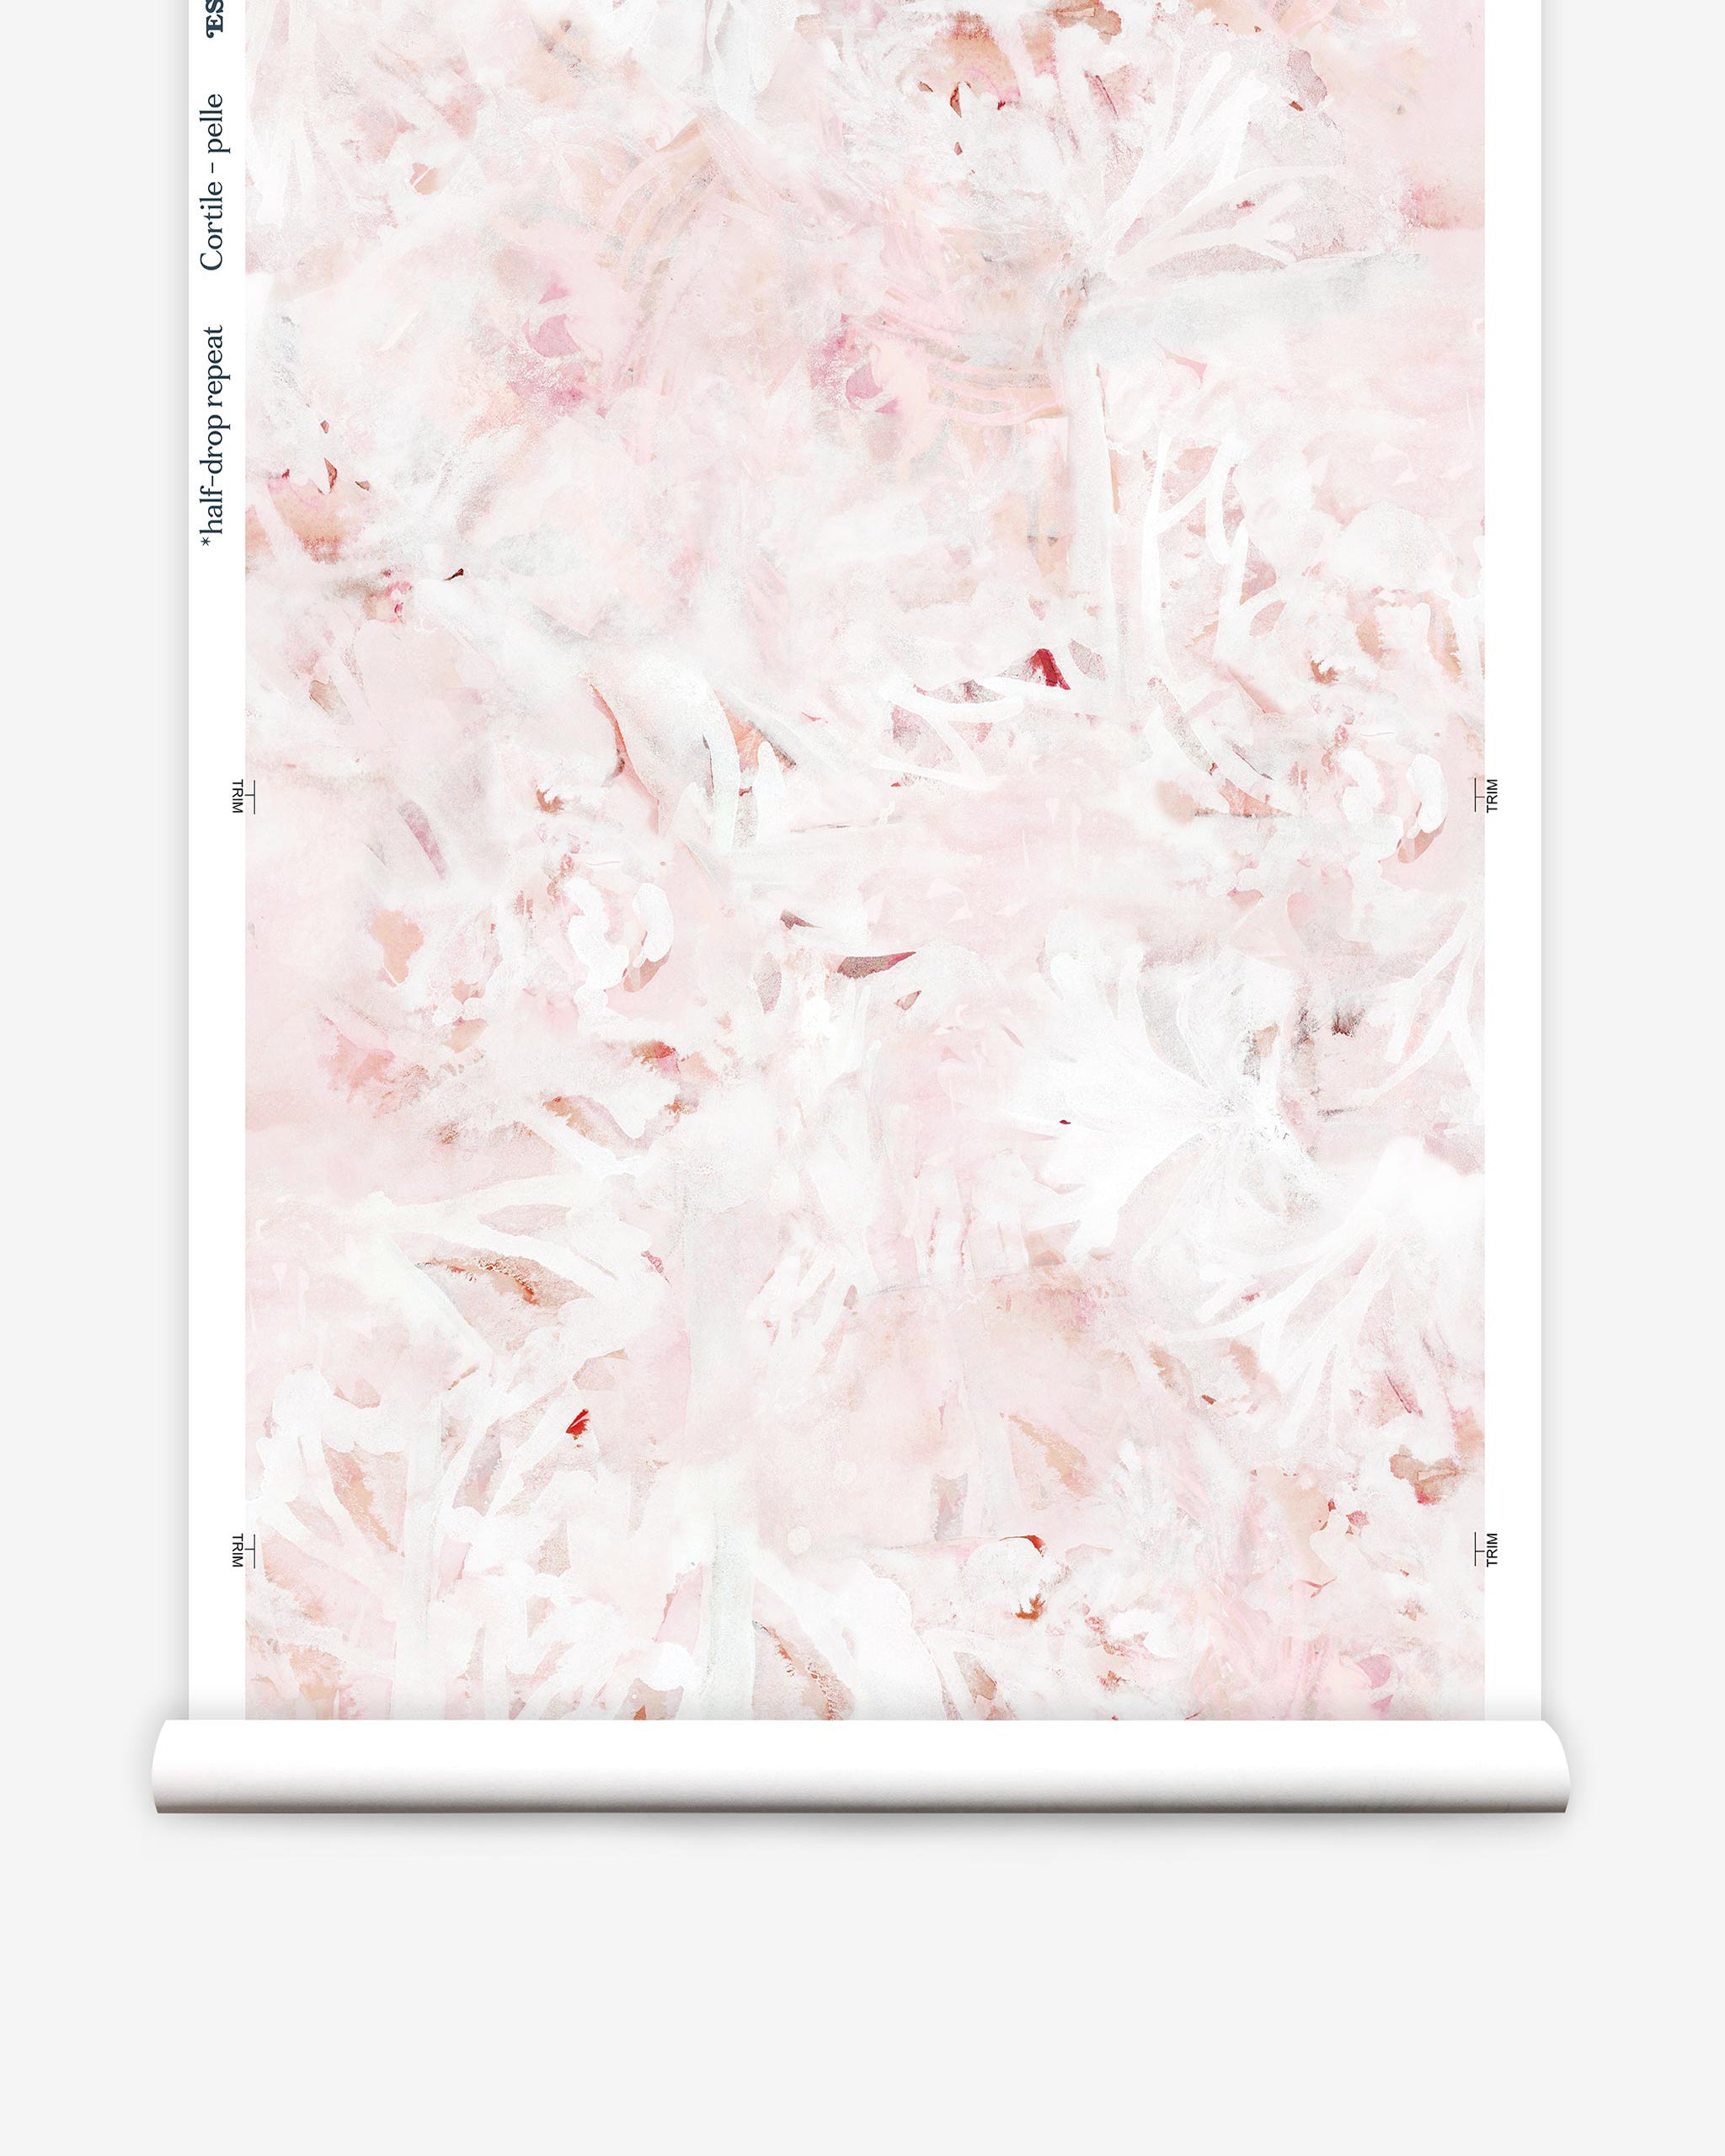 Partially unrolled wallpaper yardage in an abstract painted print in shades of pink, red and white.